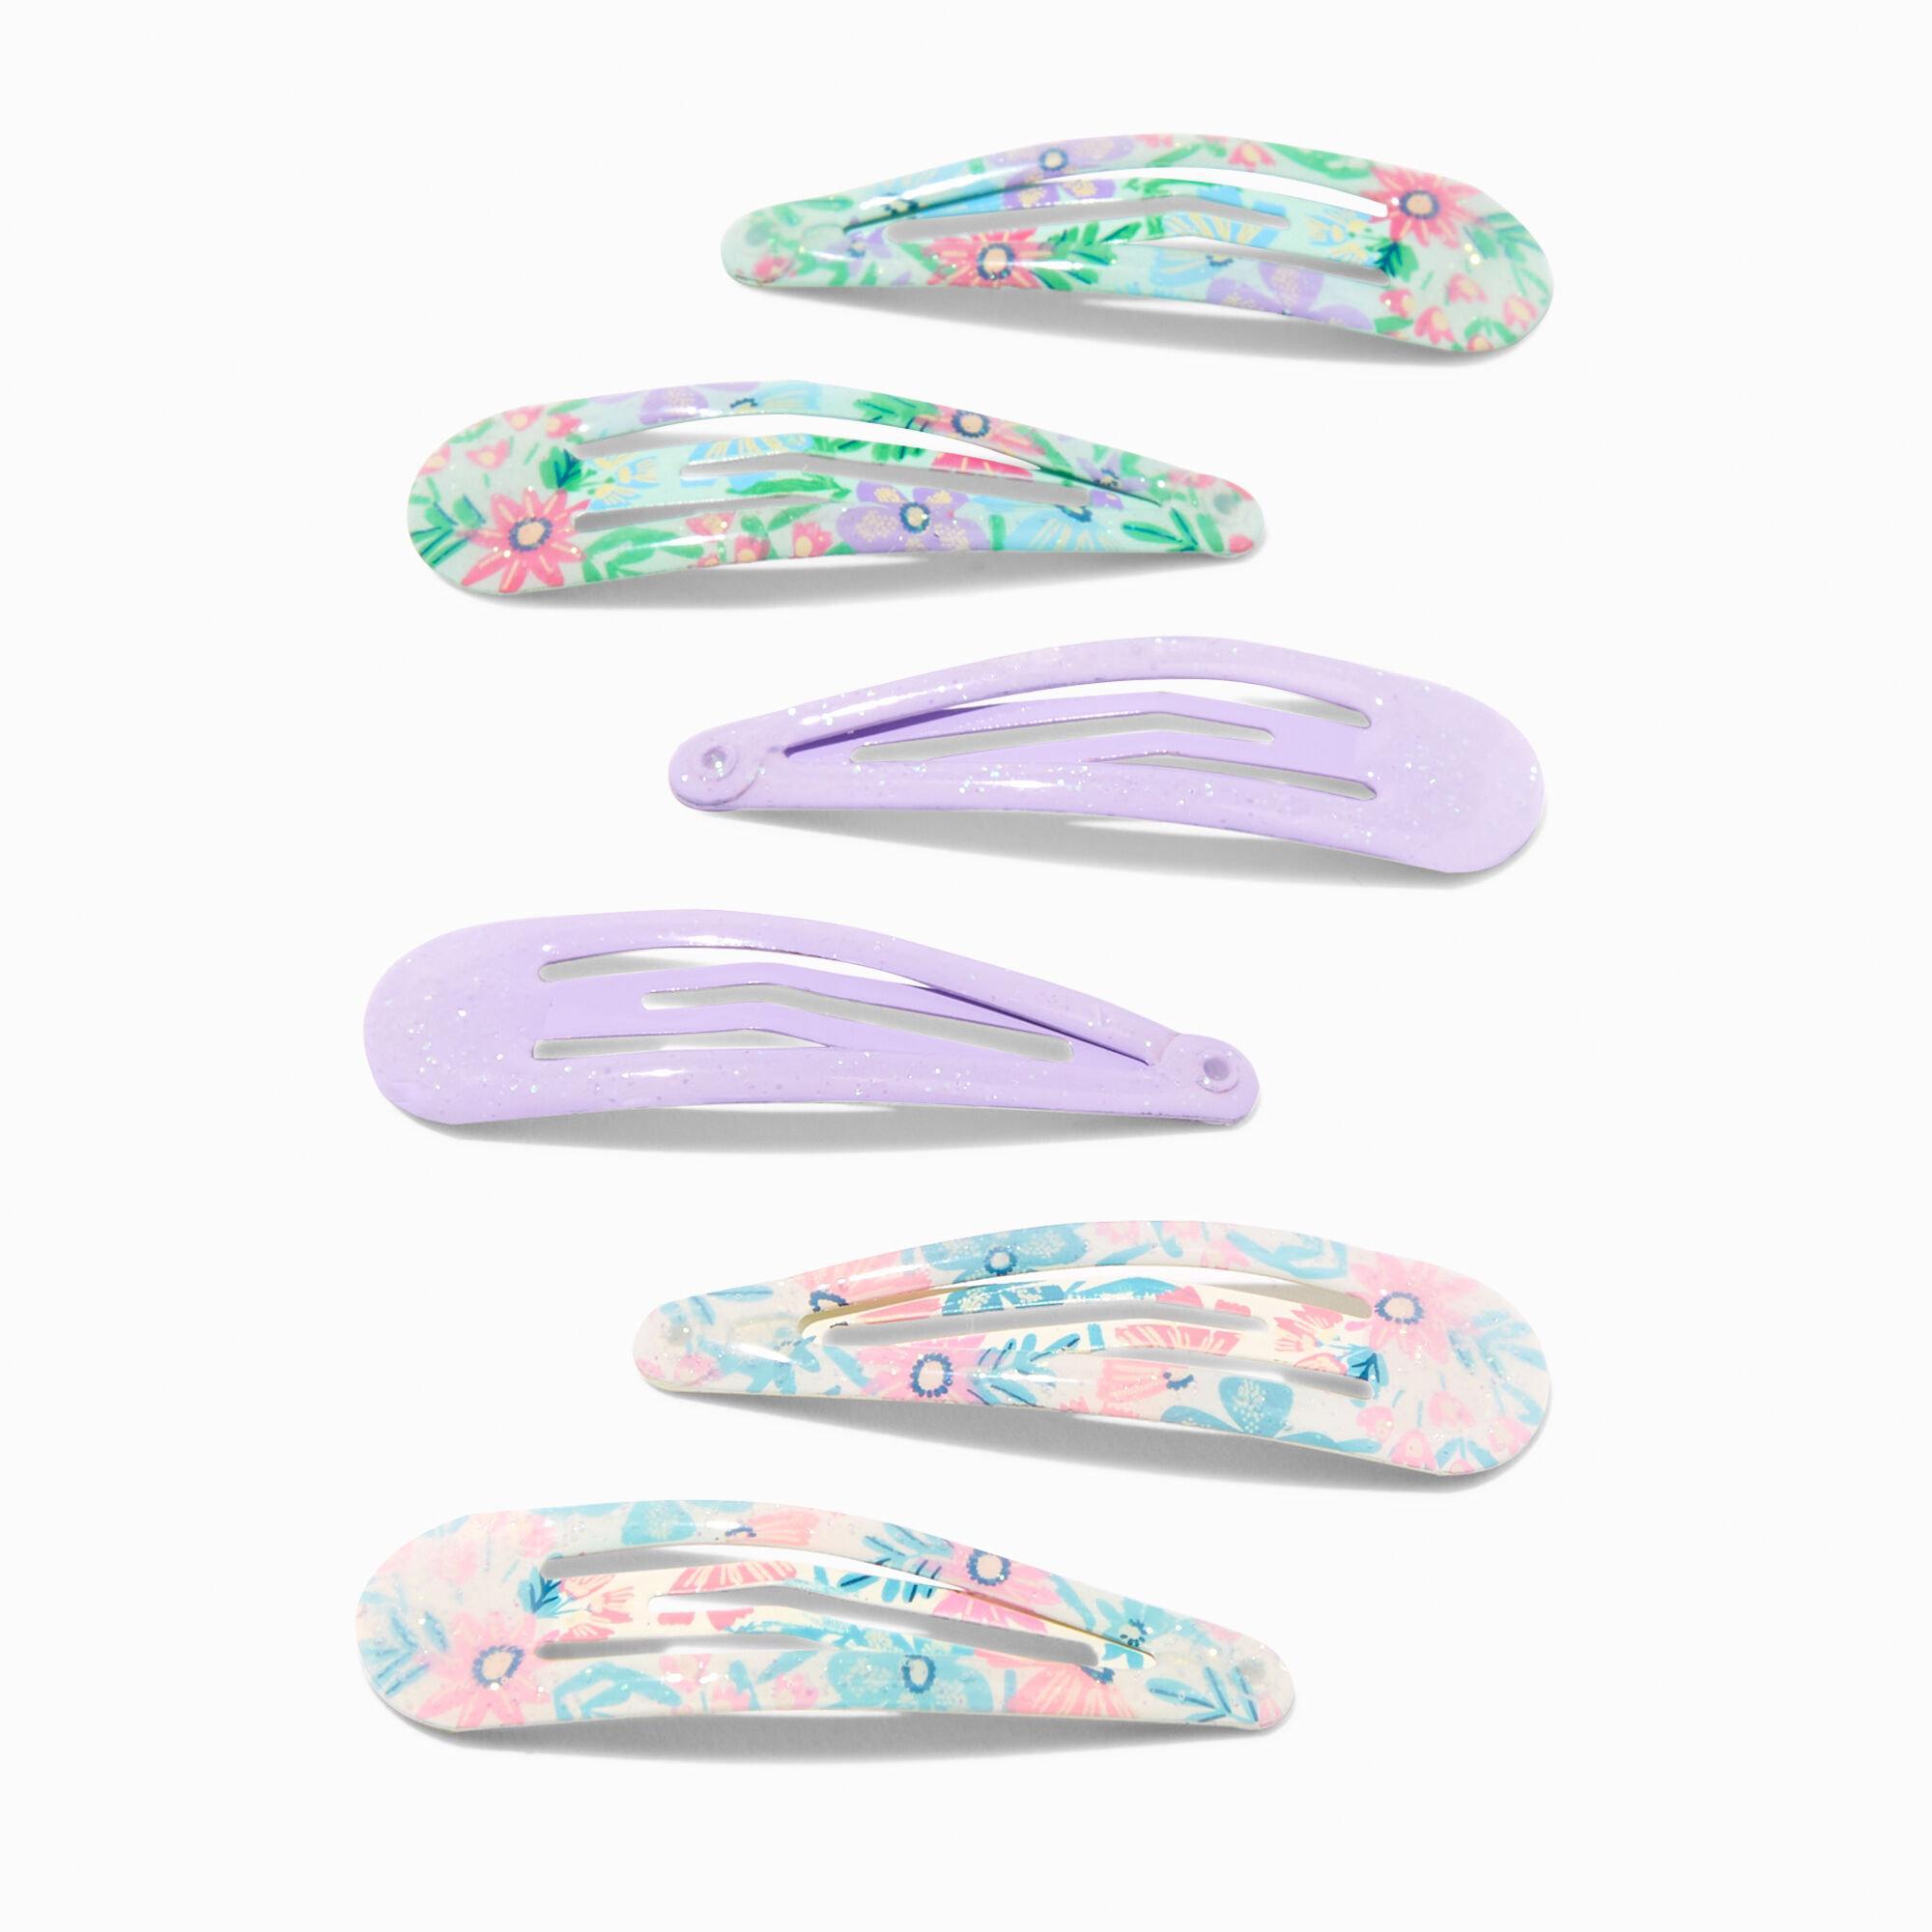 View Claires Club Flower Print Snap Hair Clips 6 Pack information